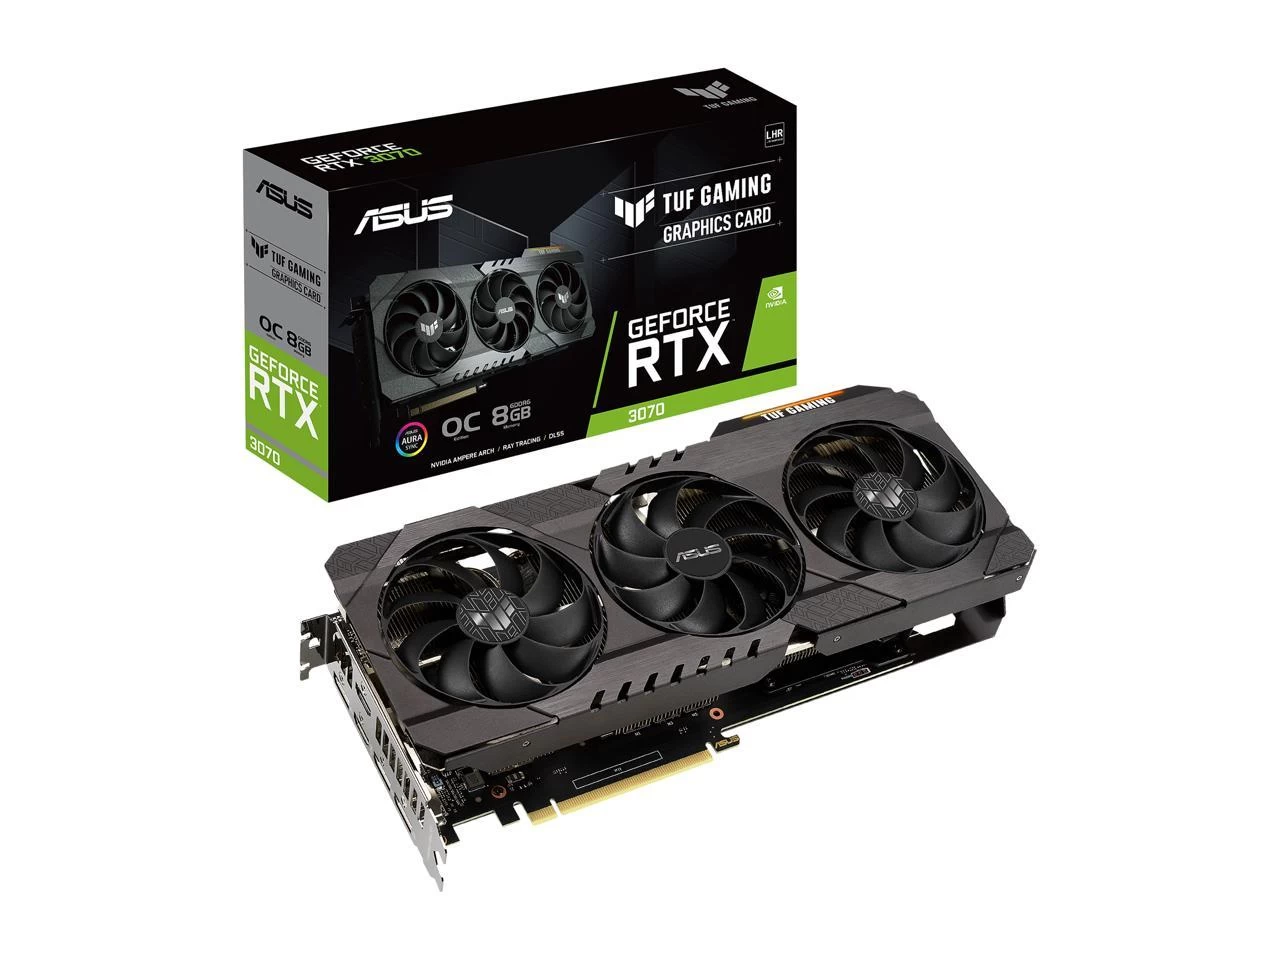 ASUS TUF Gaming GeForce RTX 3070 OC Edition Package